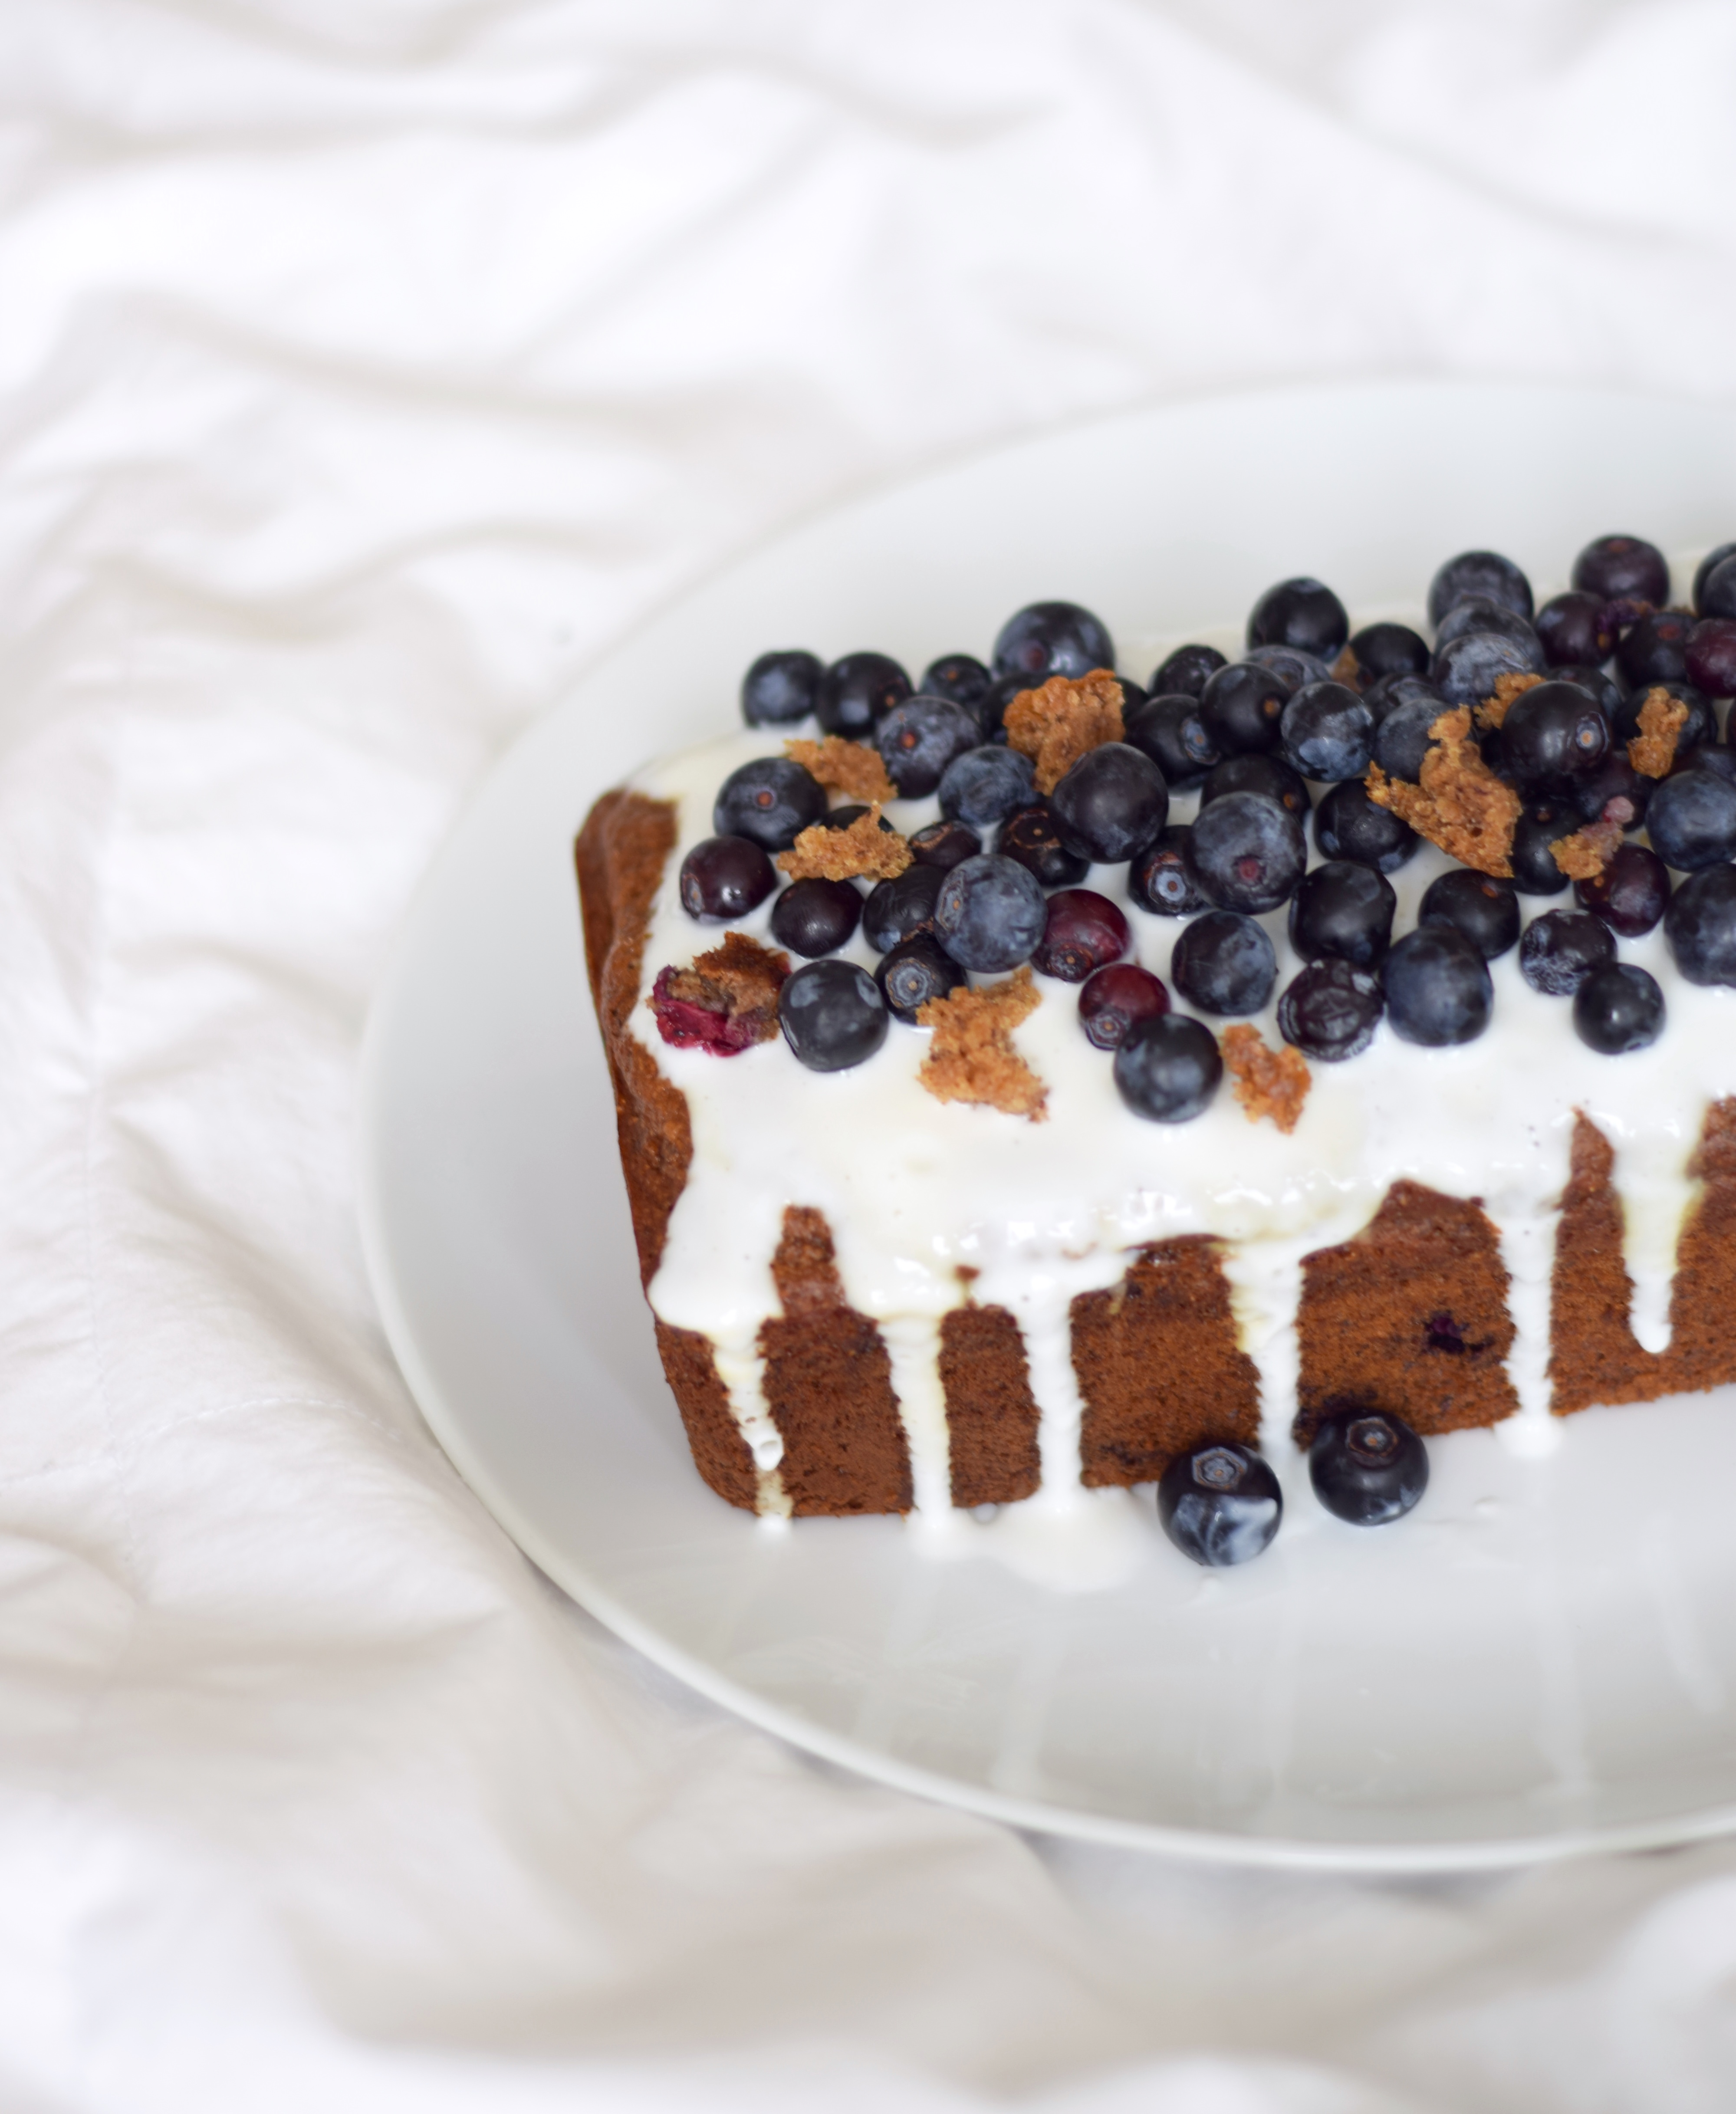 Eating Healthy On A Budget: Blueberry Loaf Cake